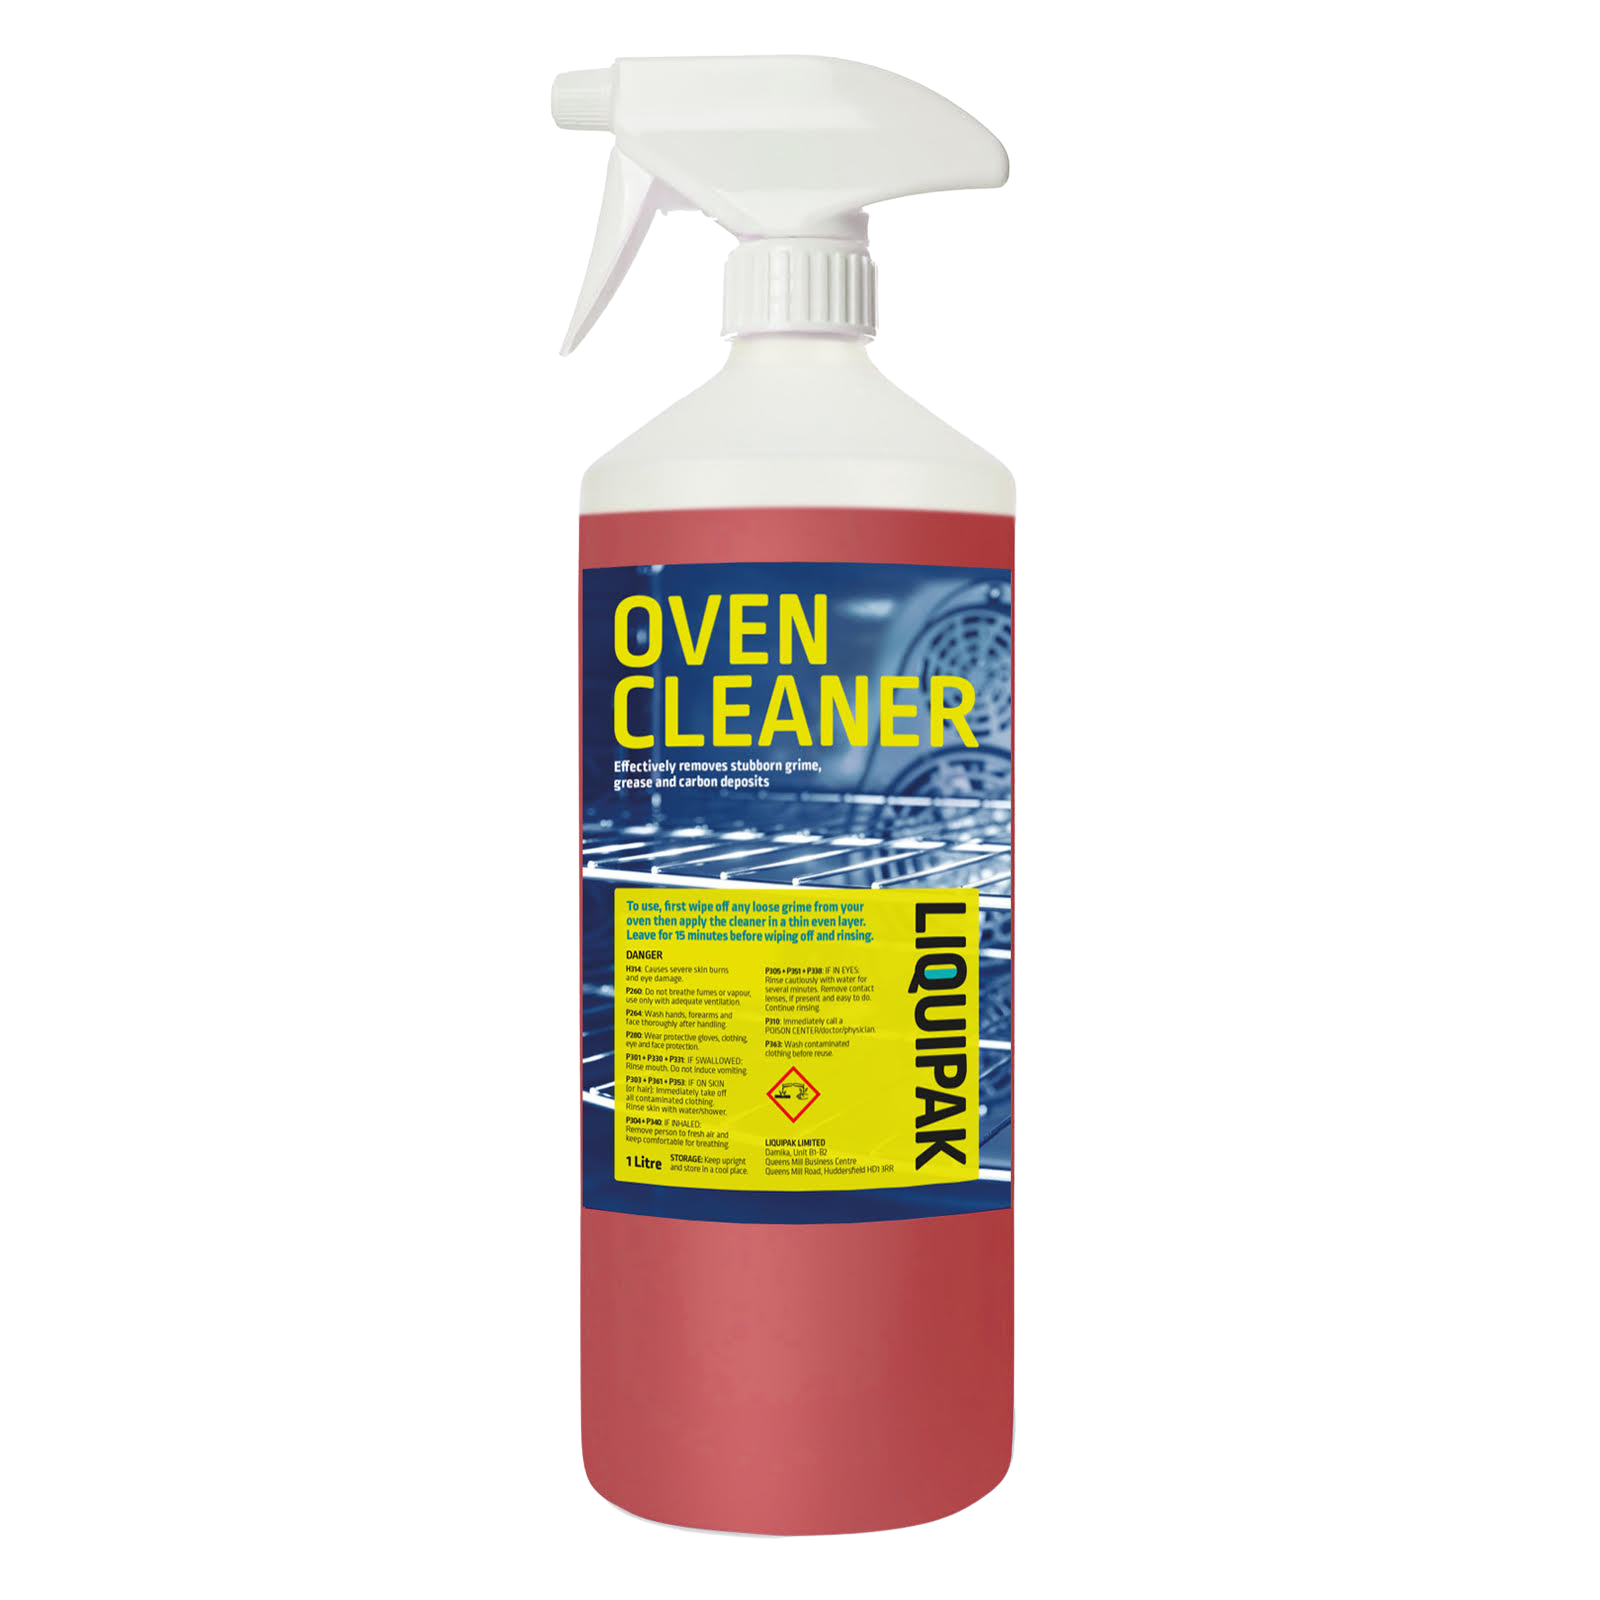 Oven Cleaner